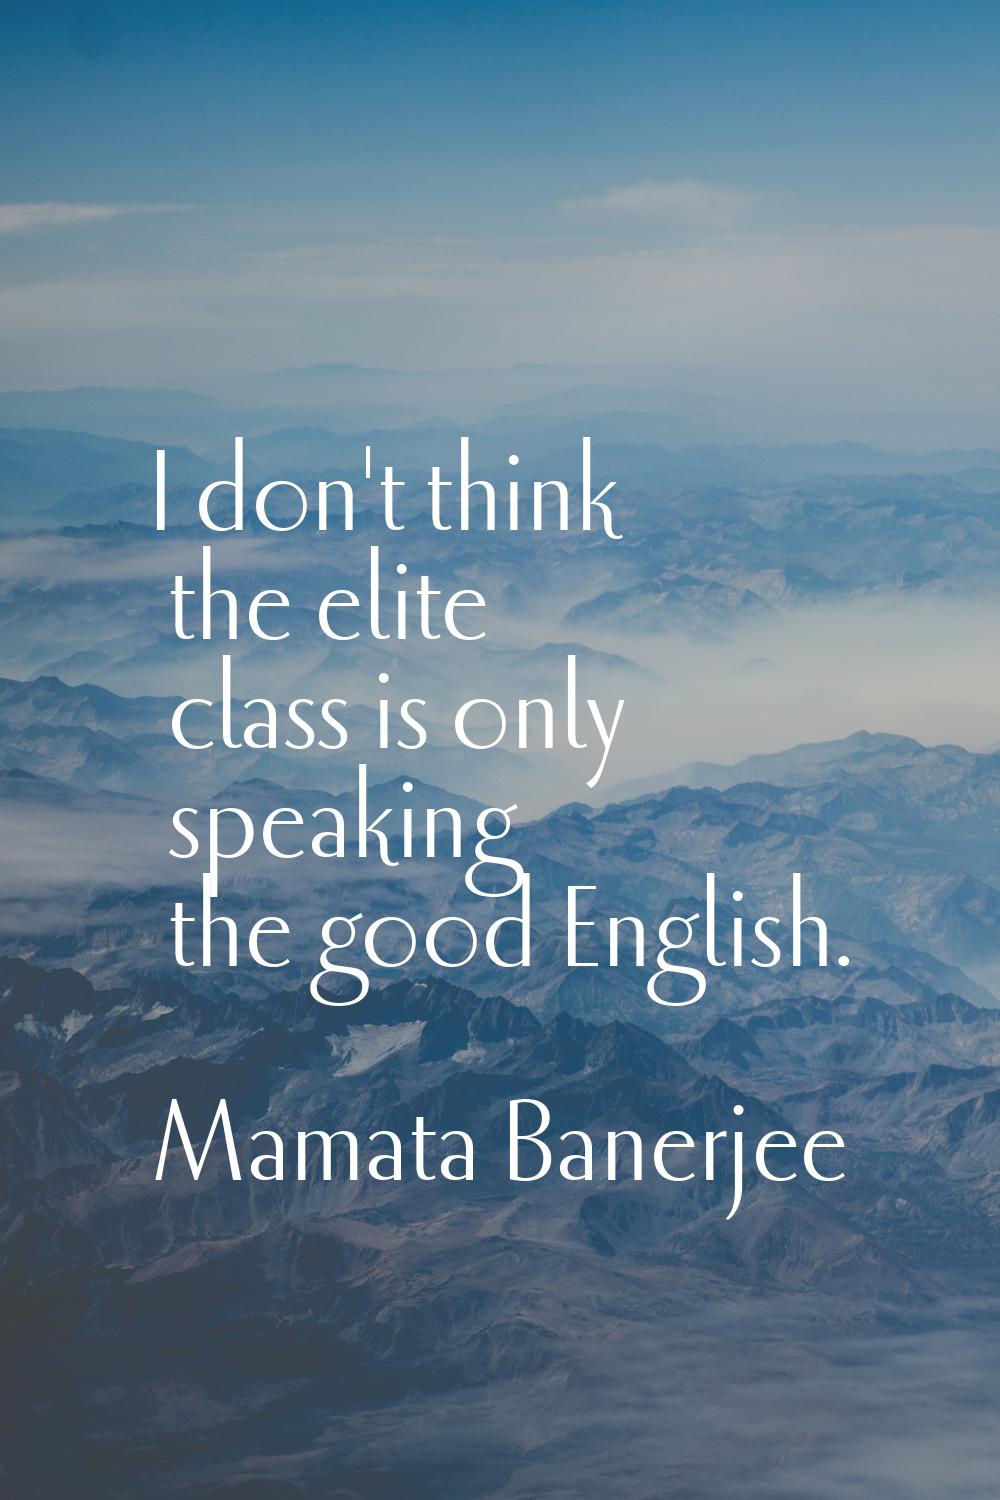 I don't think the elite class is only speaking the good English.